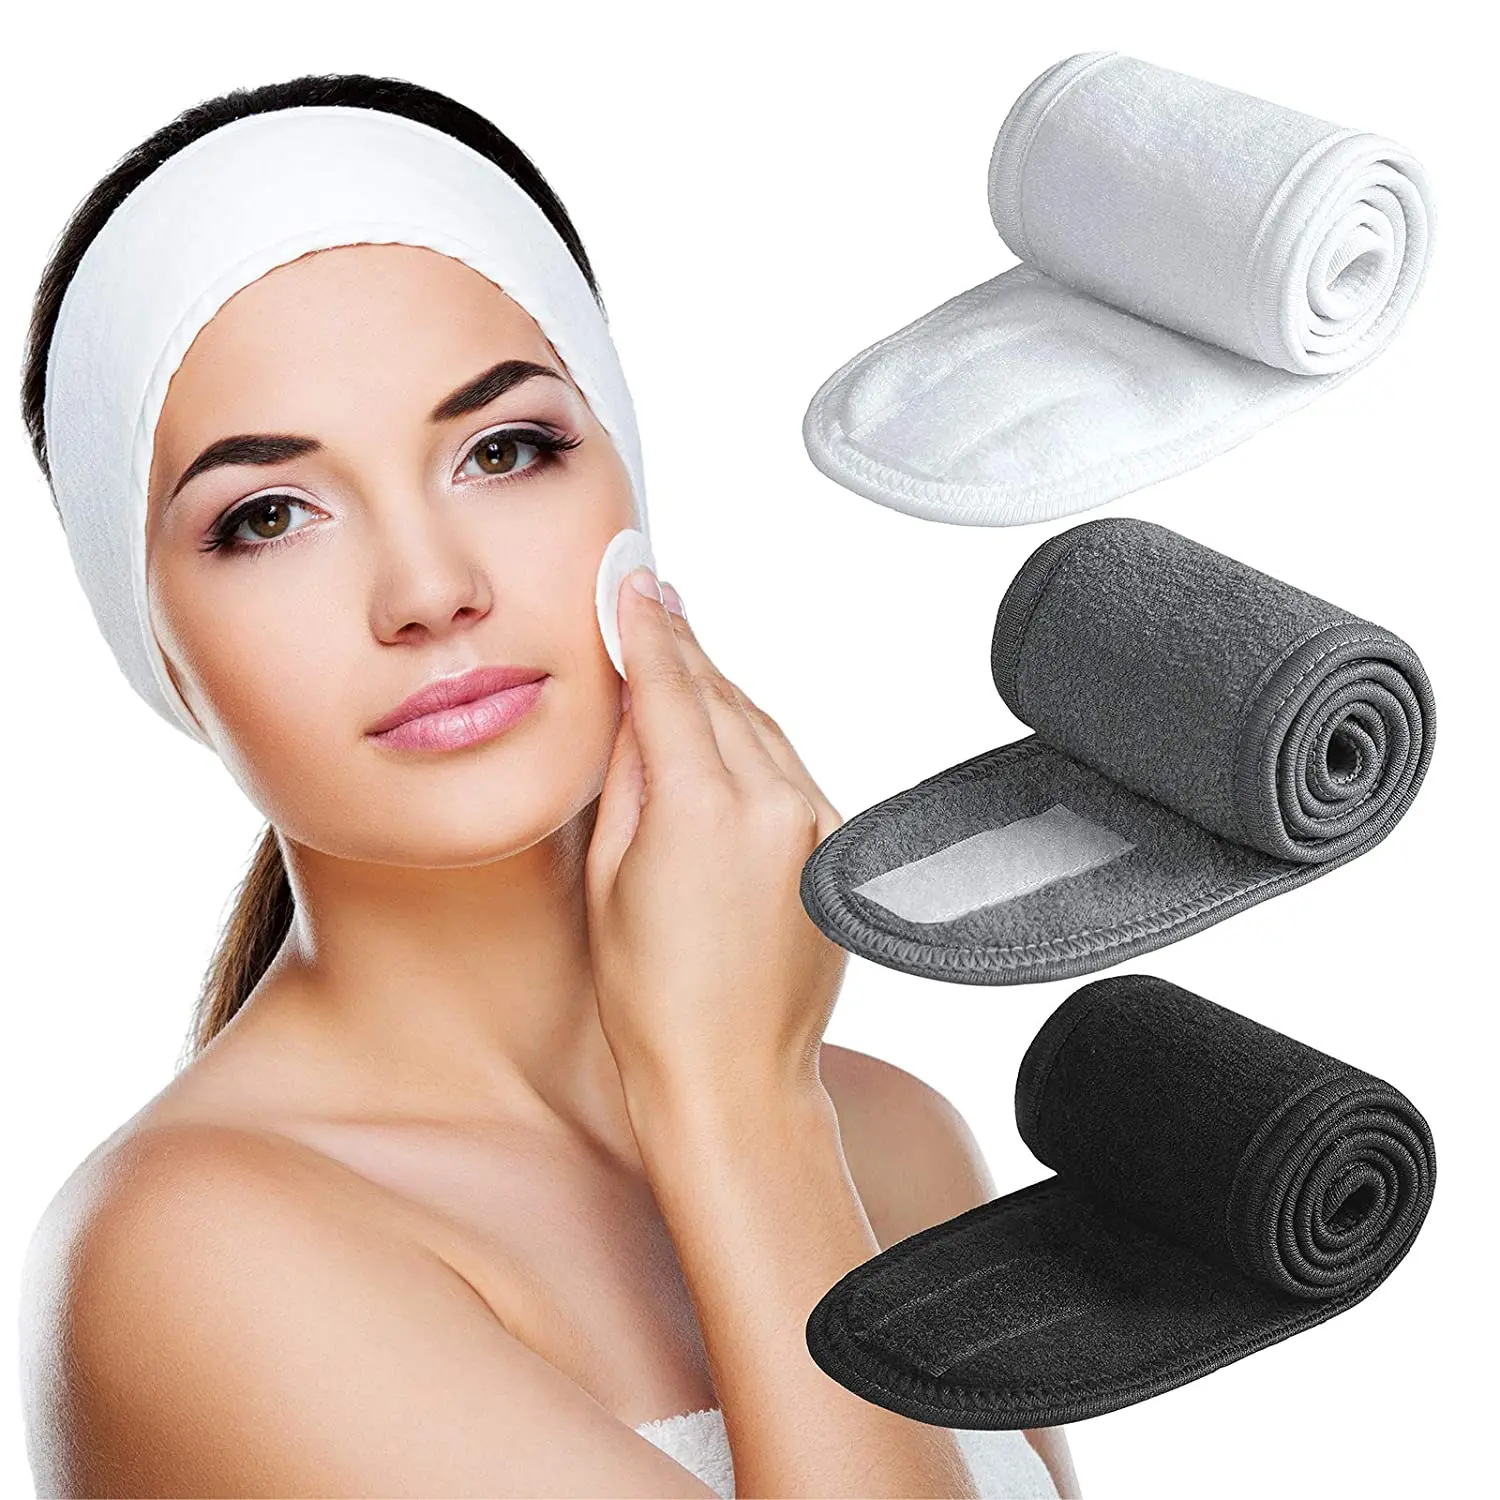 Spa Headband - 3 Pack Ultra Soft Adjustable Face Wash Headband Terry Cloth Stretch Make Up Wrap for Face Washing, Shower, Yoga зауженные брюки uniqlo ultra stretch active airy